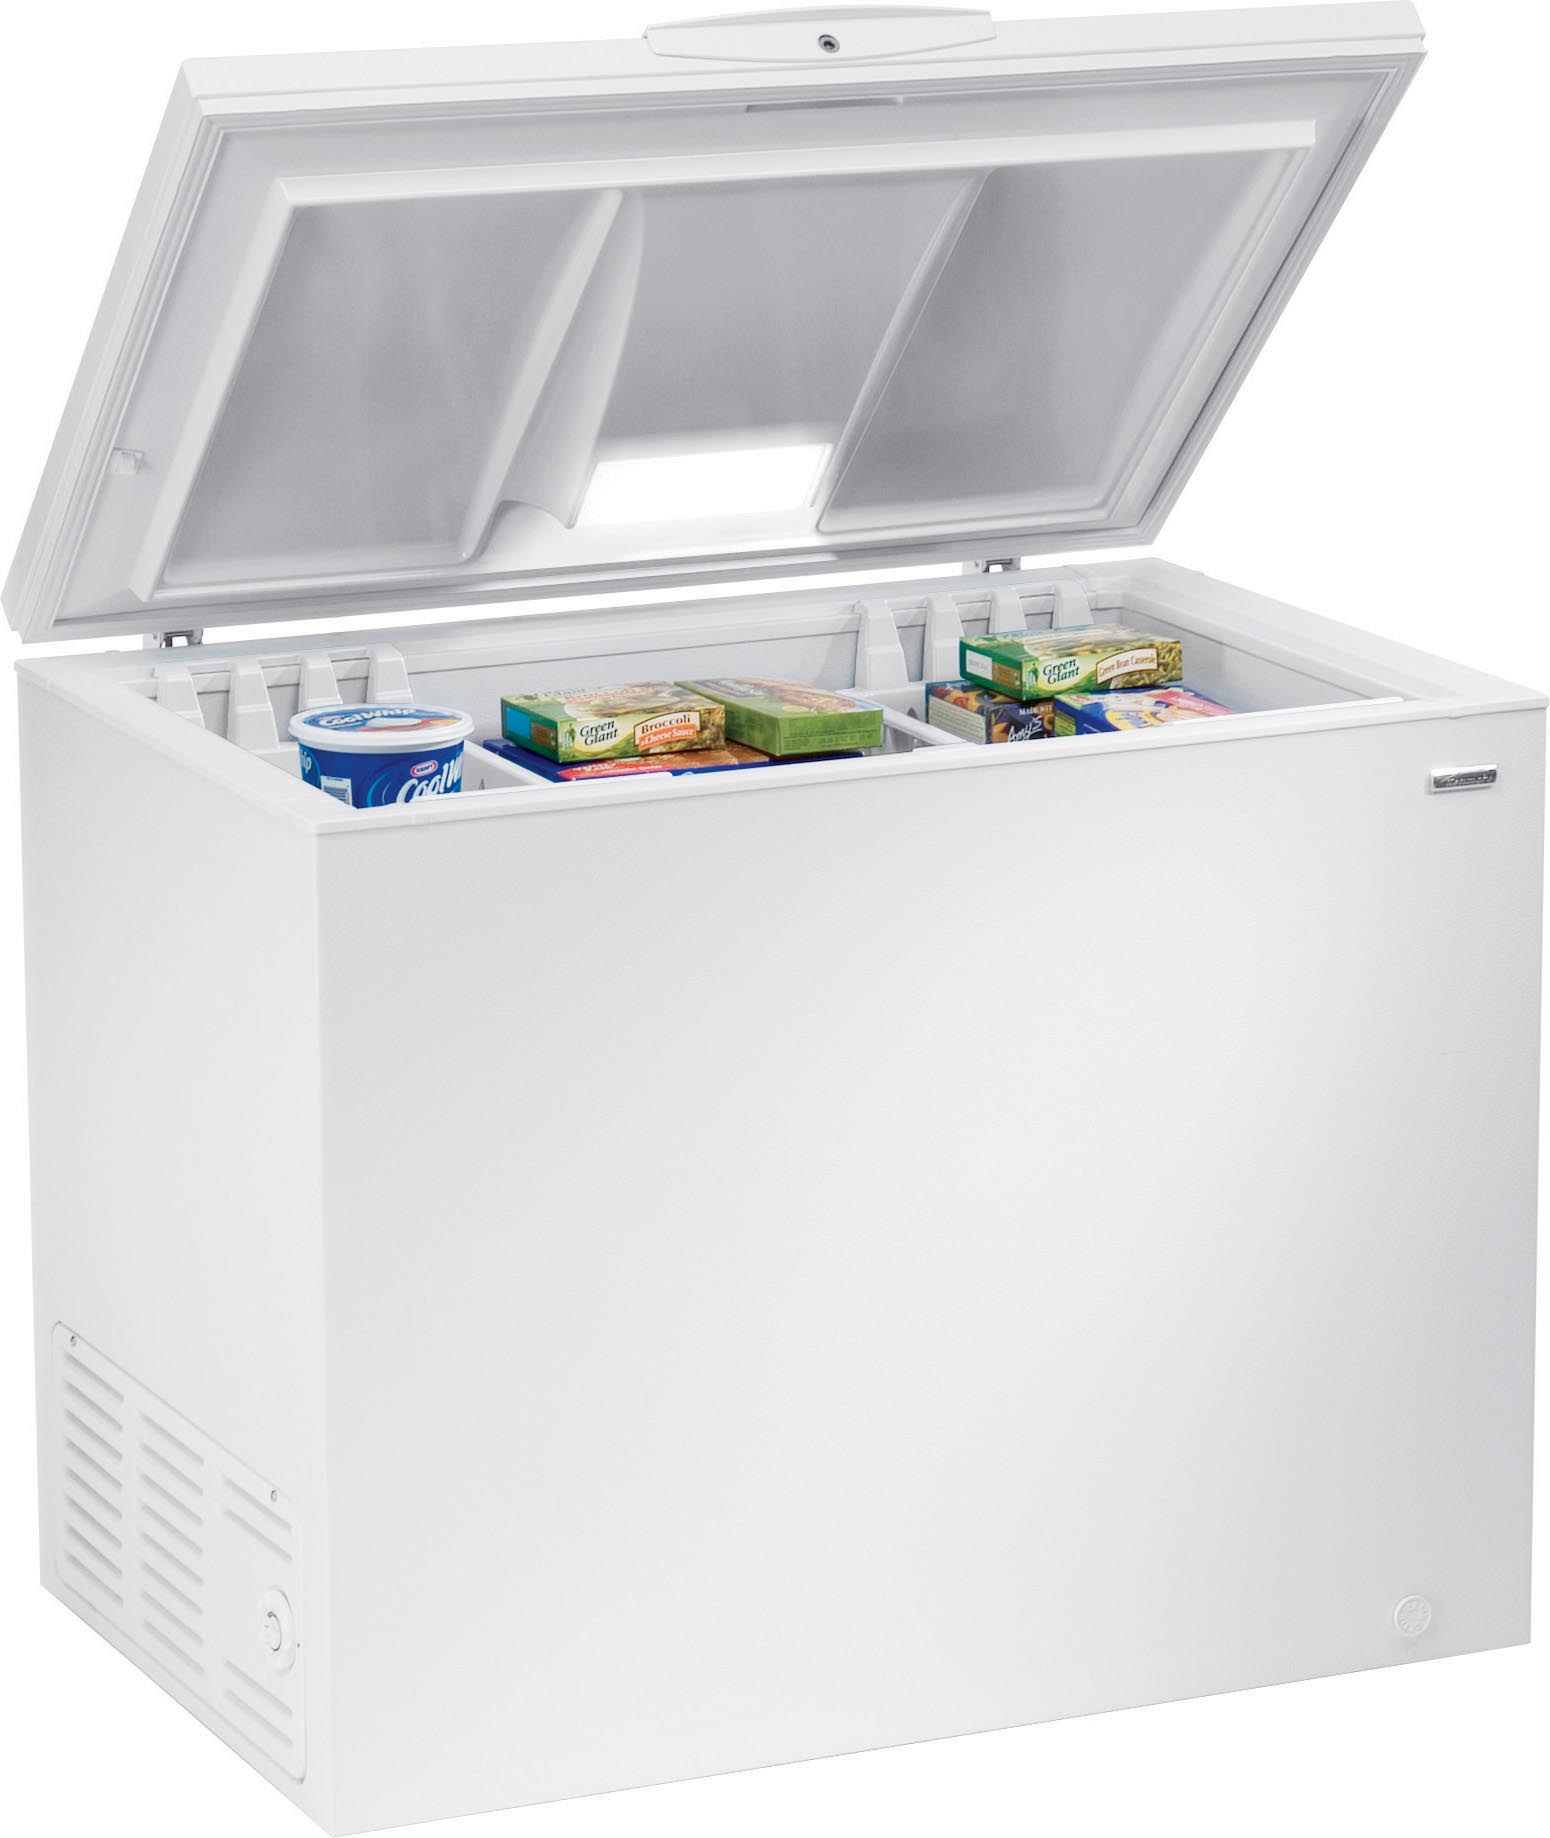 Kenmore 13 cu. ft. Chest Freezer (1634) White